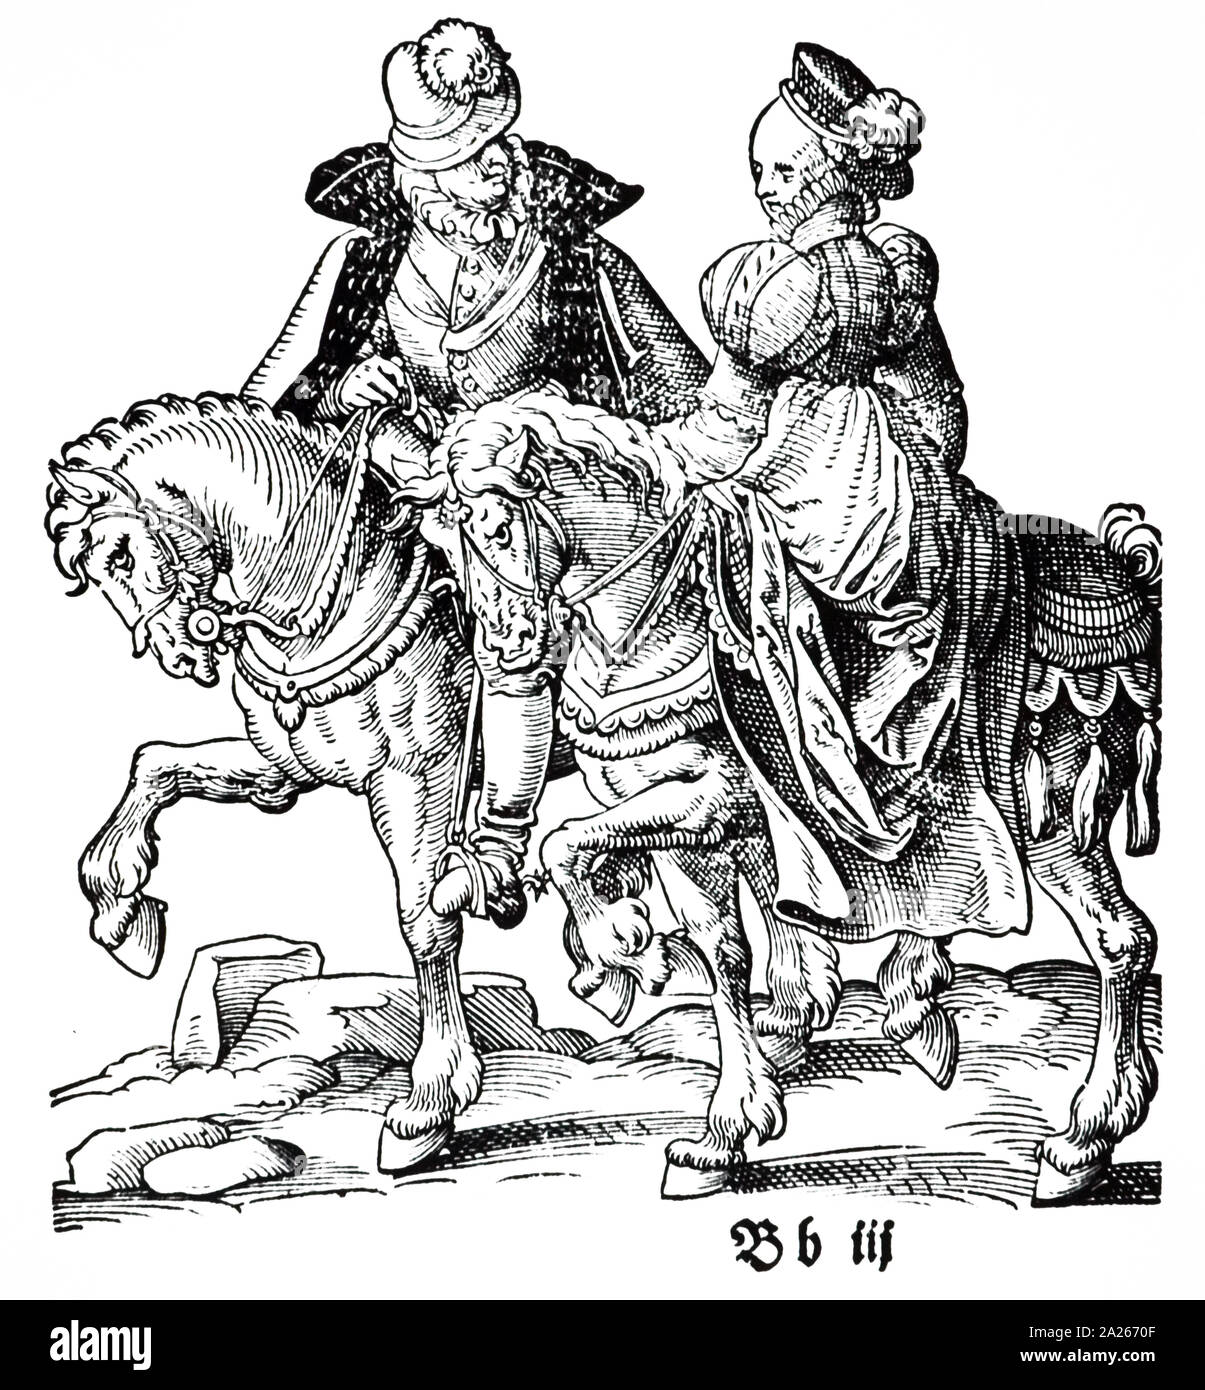 A woodcut engraving depicting a lady riding side-saddle attended by a male attendant. Woodcut by Jost Amman (1539-1591) a Swiss-German artist. Dated 16th century Stock Photo